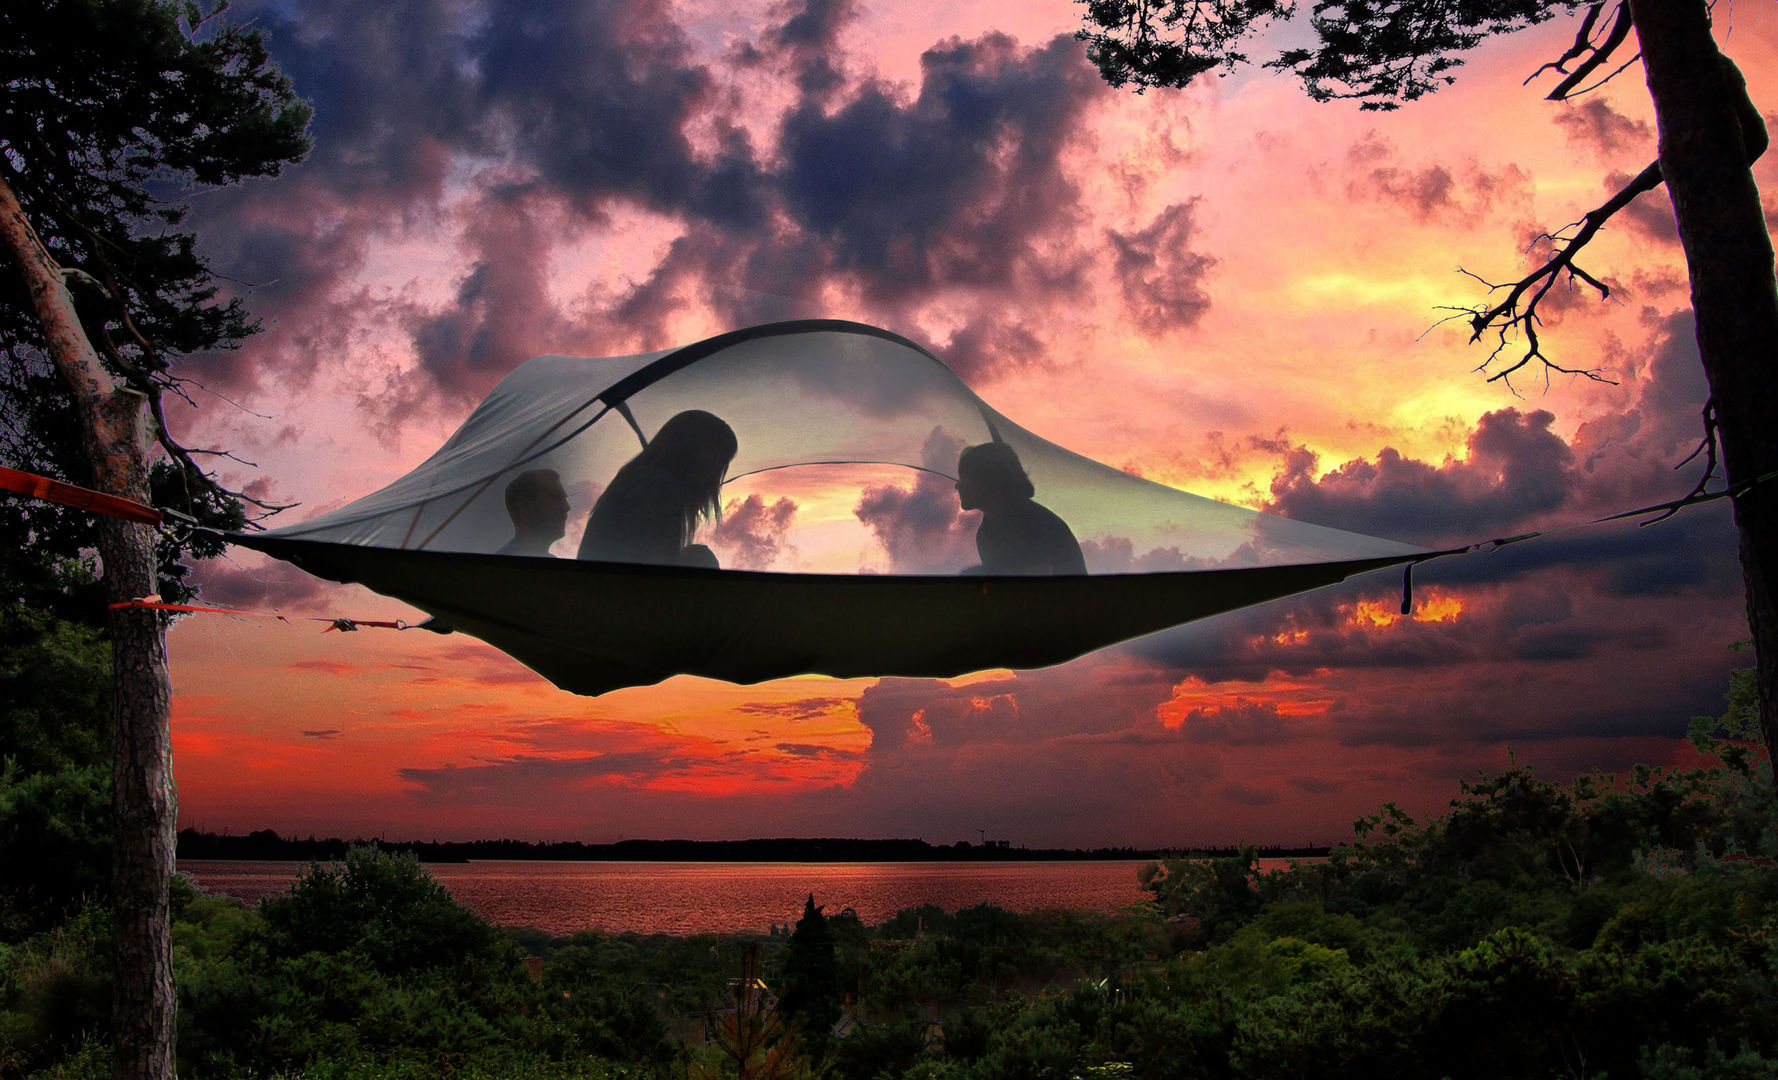 Add a New Touch to Your Camping Adventure with the Tentsile Stingray, Tentsile Tentsile 庭院 鞦韆與玩具